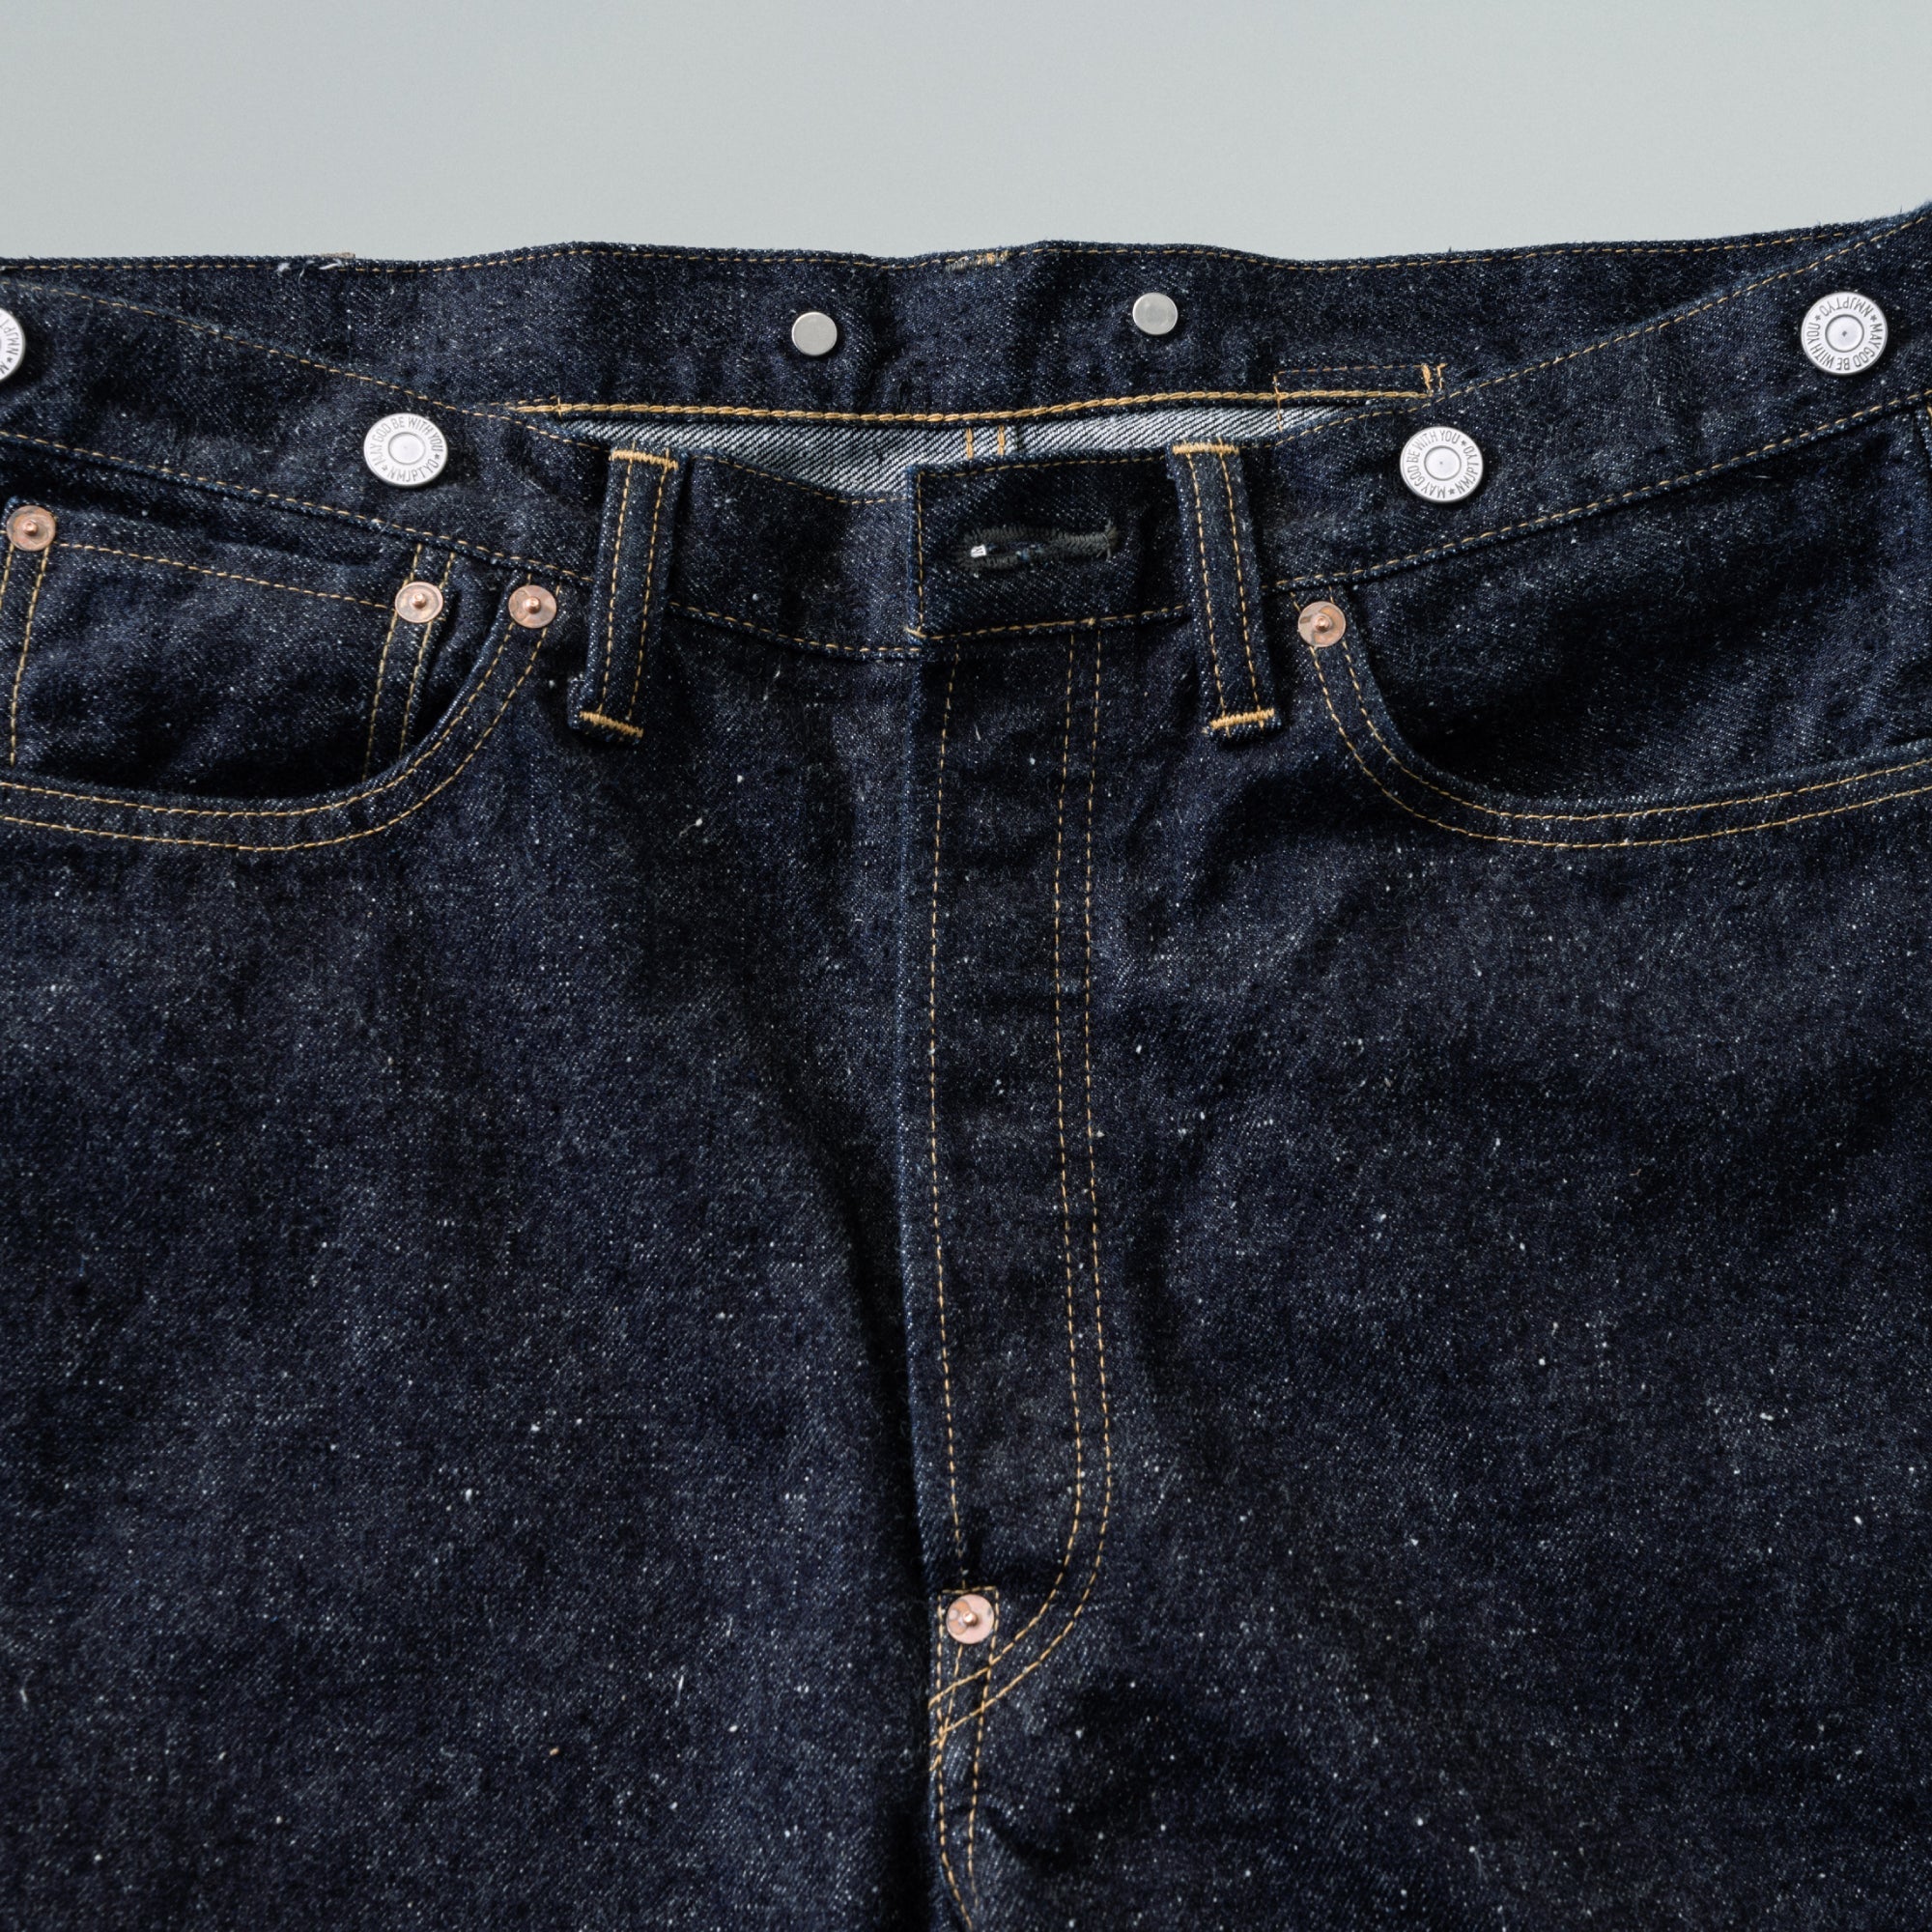 New Manual #002 1942 LV JEANS / OW 33-